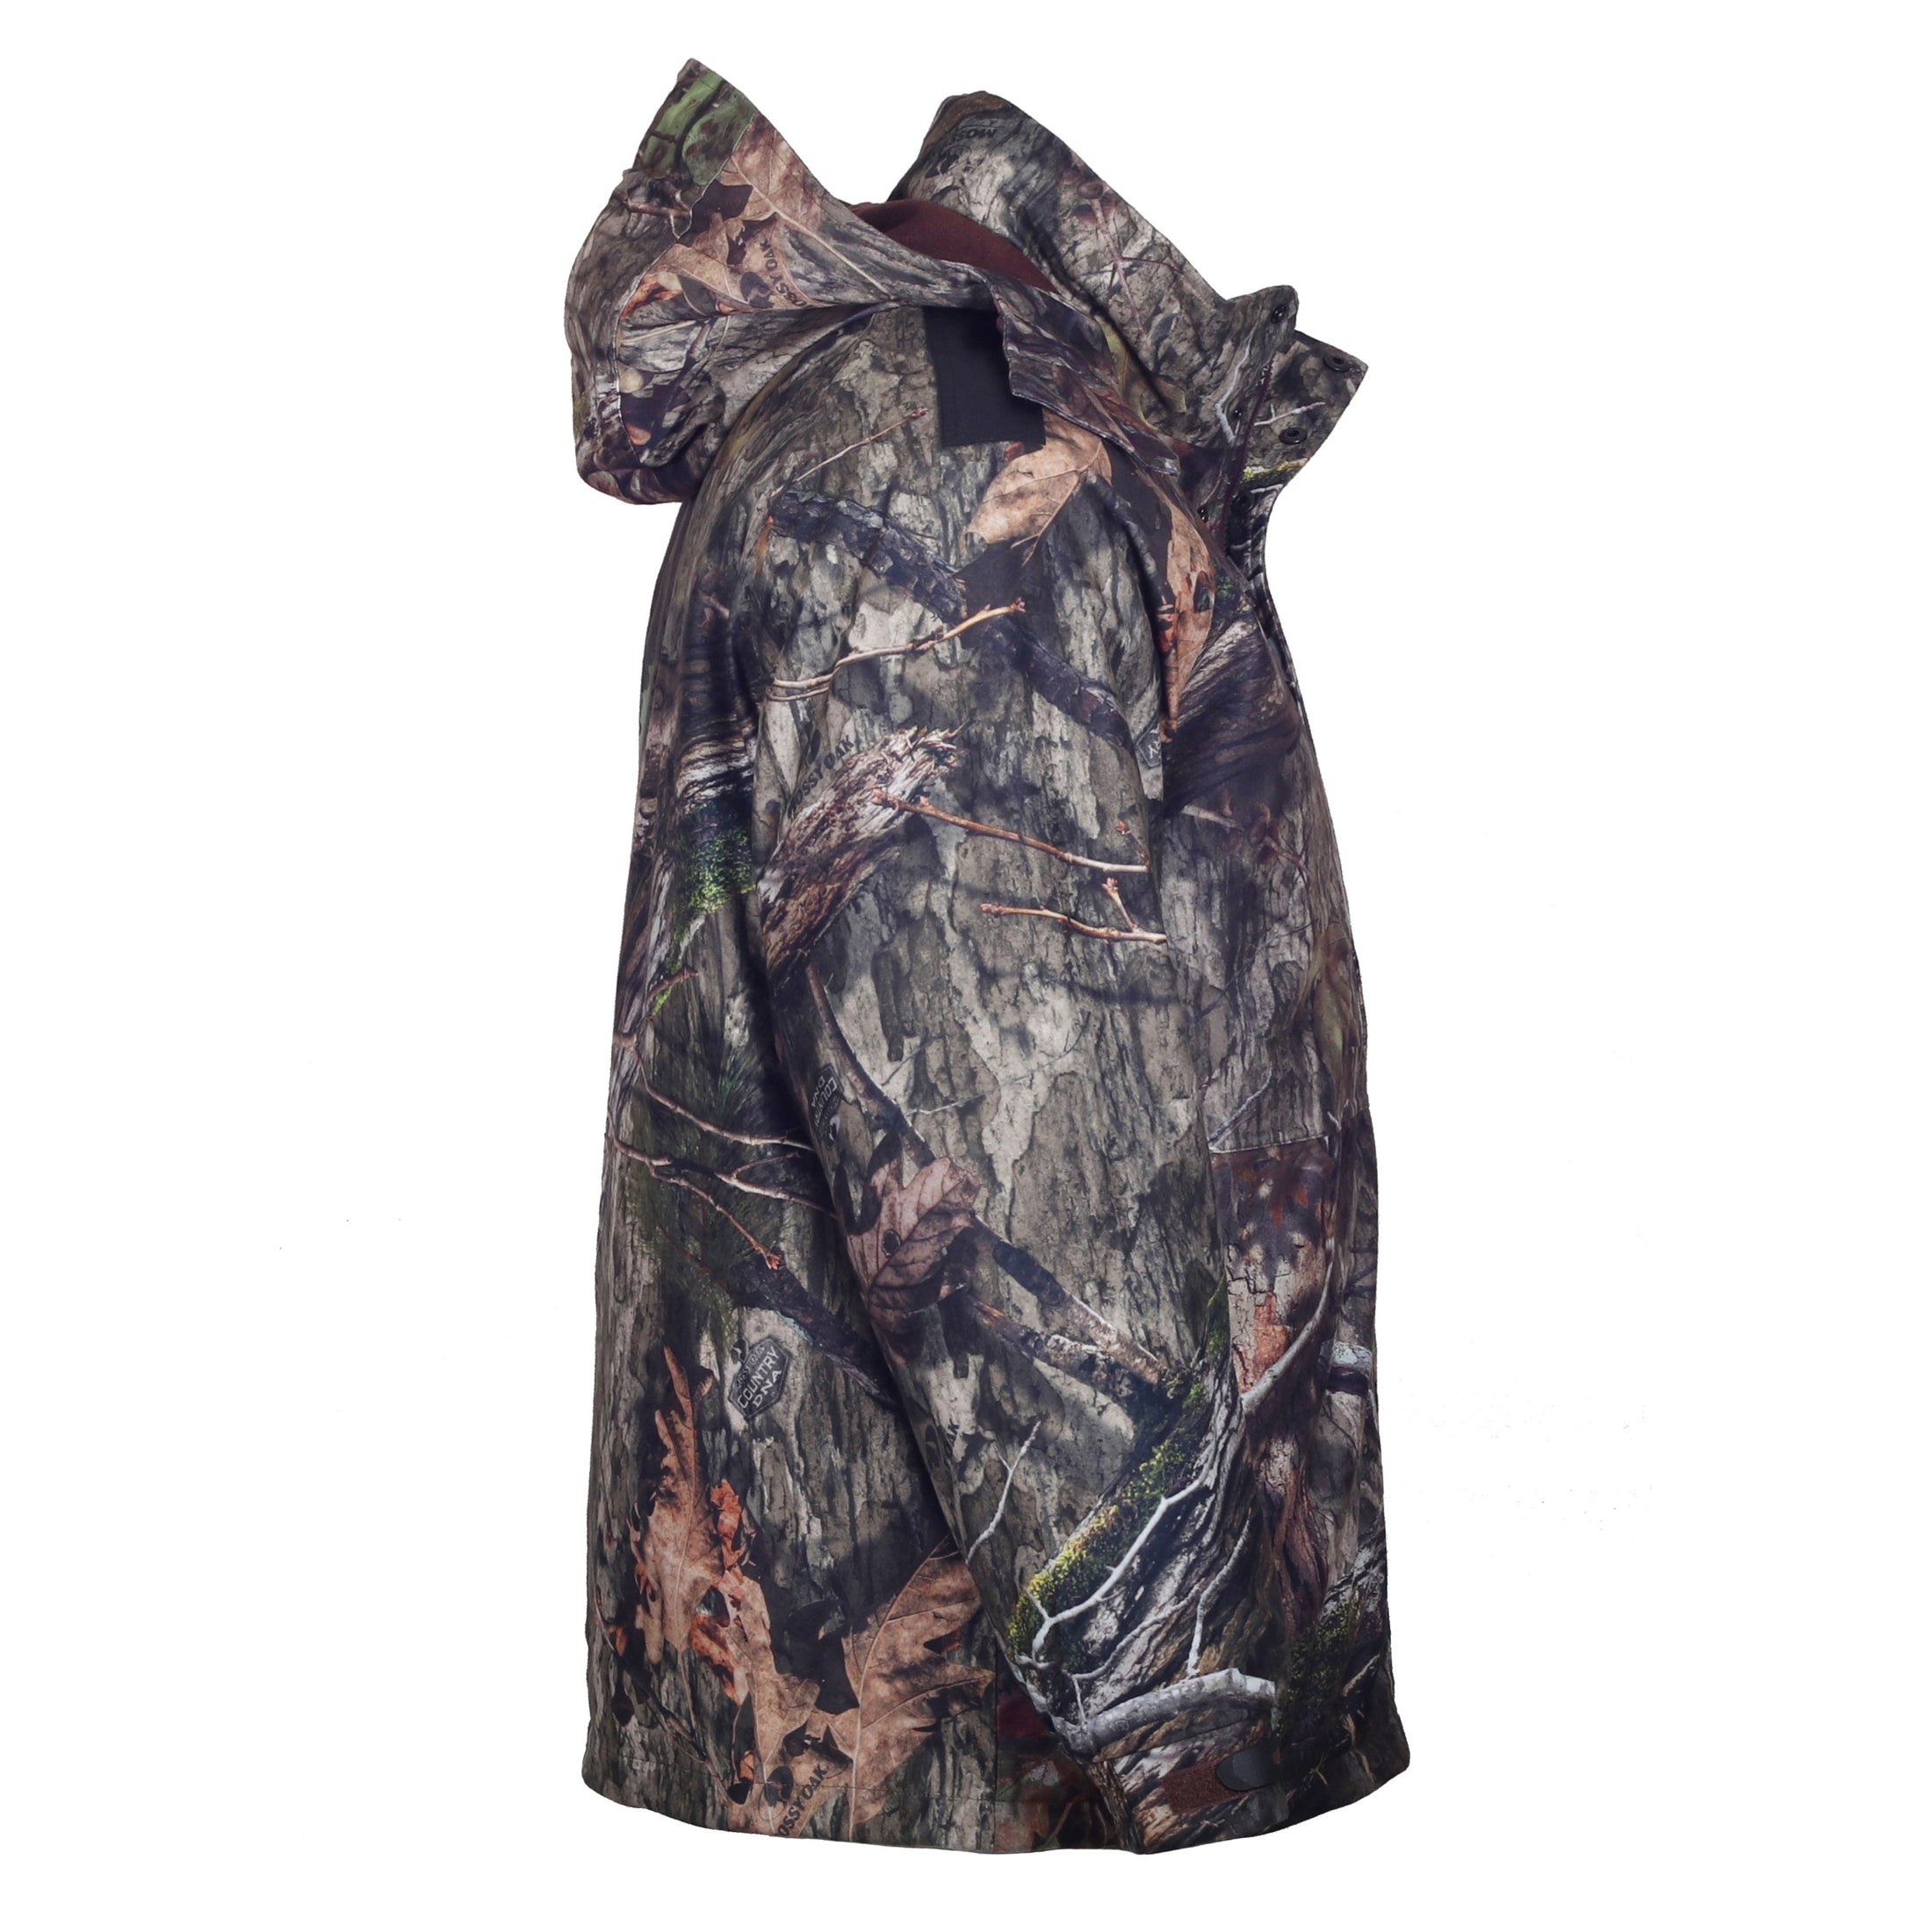 gamehide wild systems parka side view (mossy oak dna)